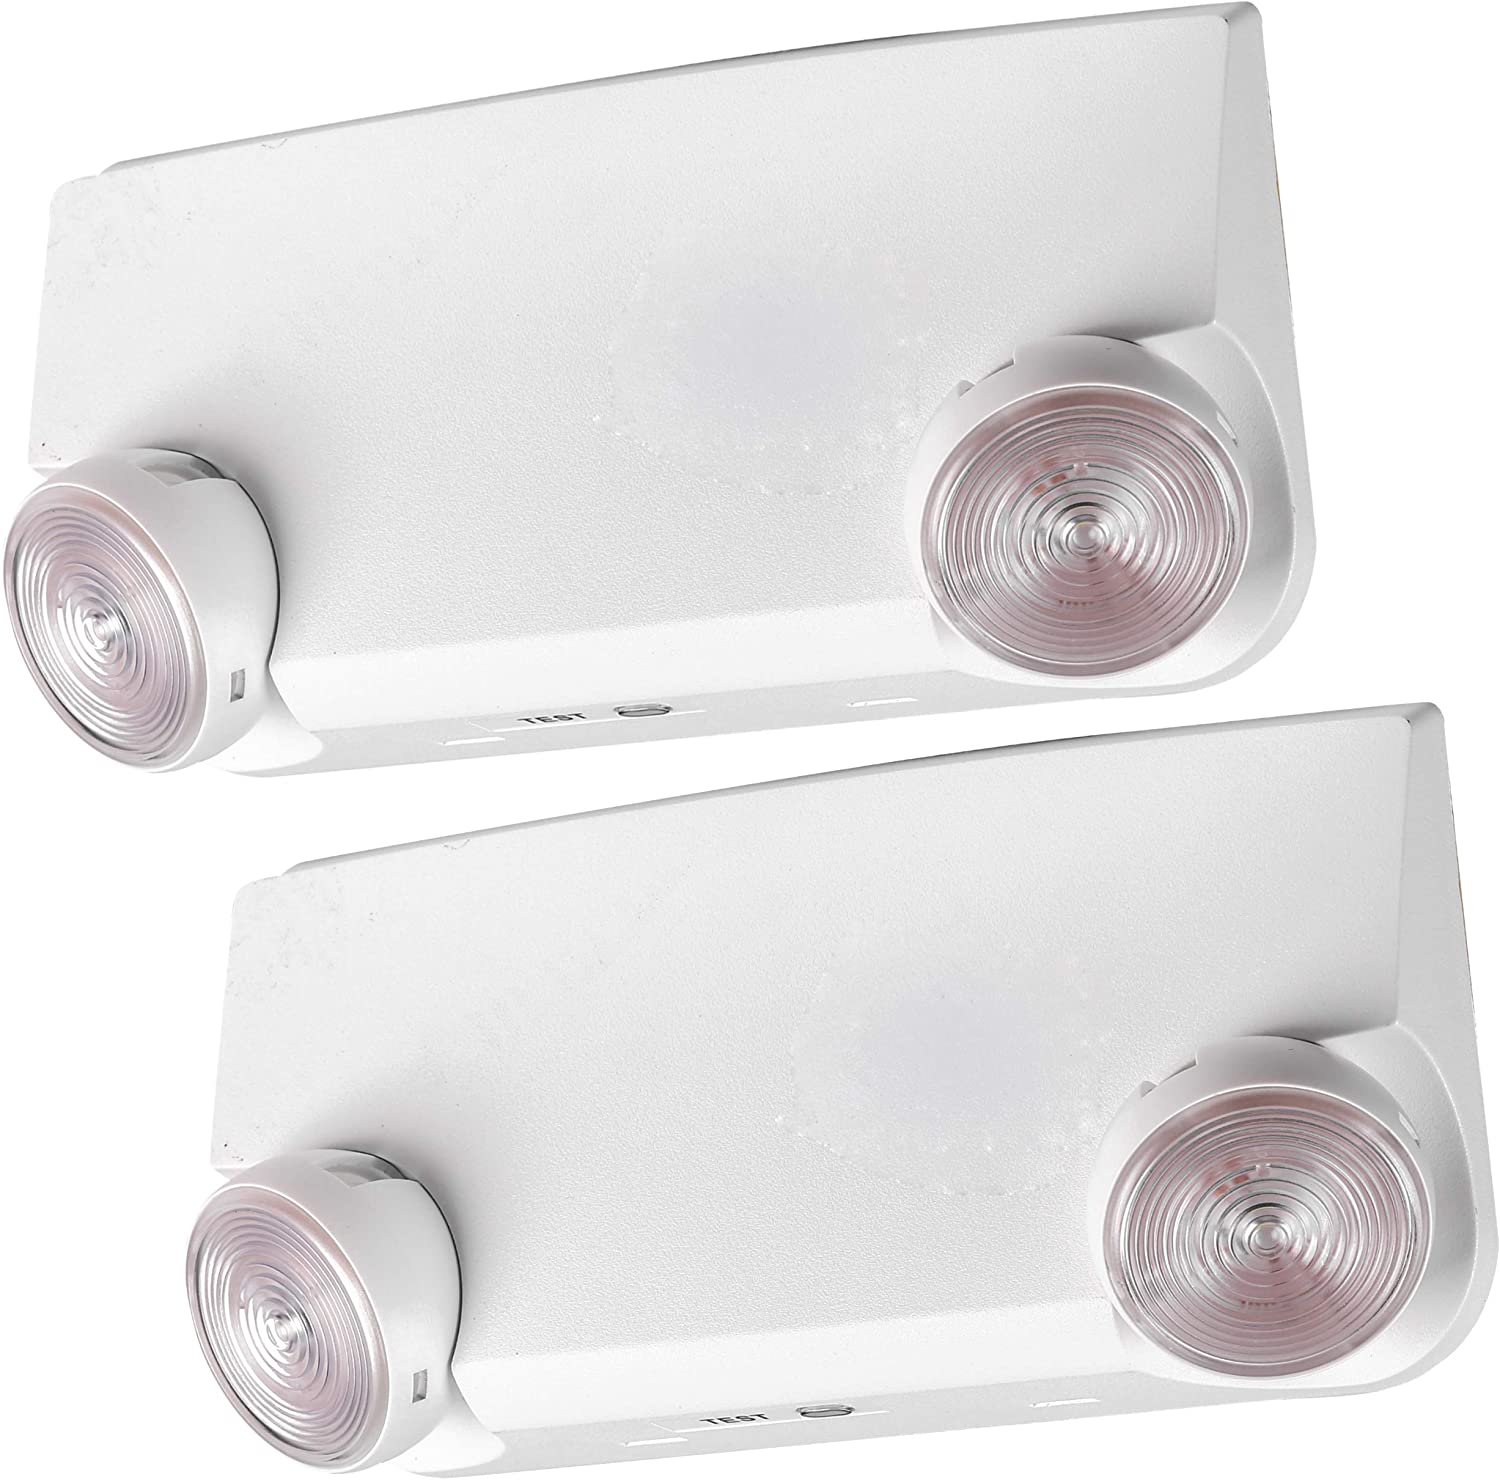 Adjustable Two Round Heads LED Emergency Light with Battery Backup Pack of 2 